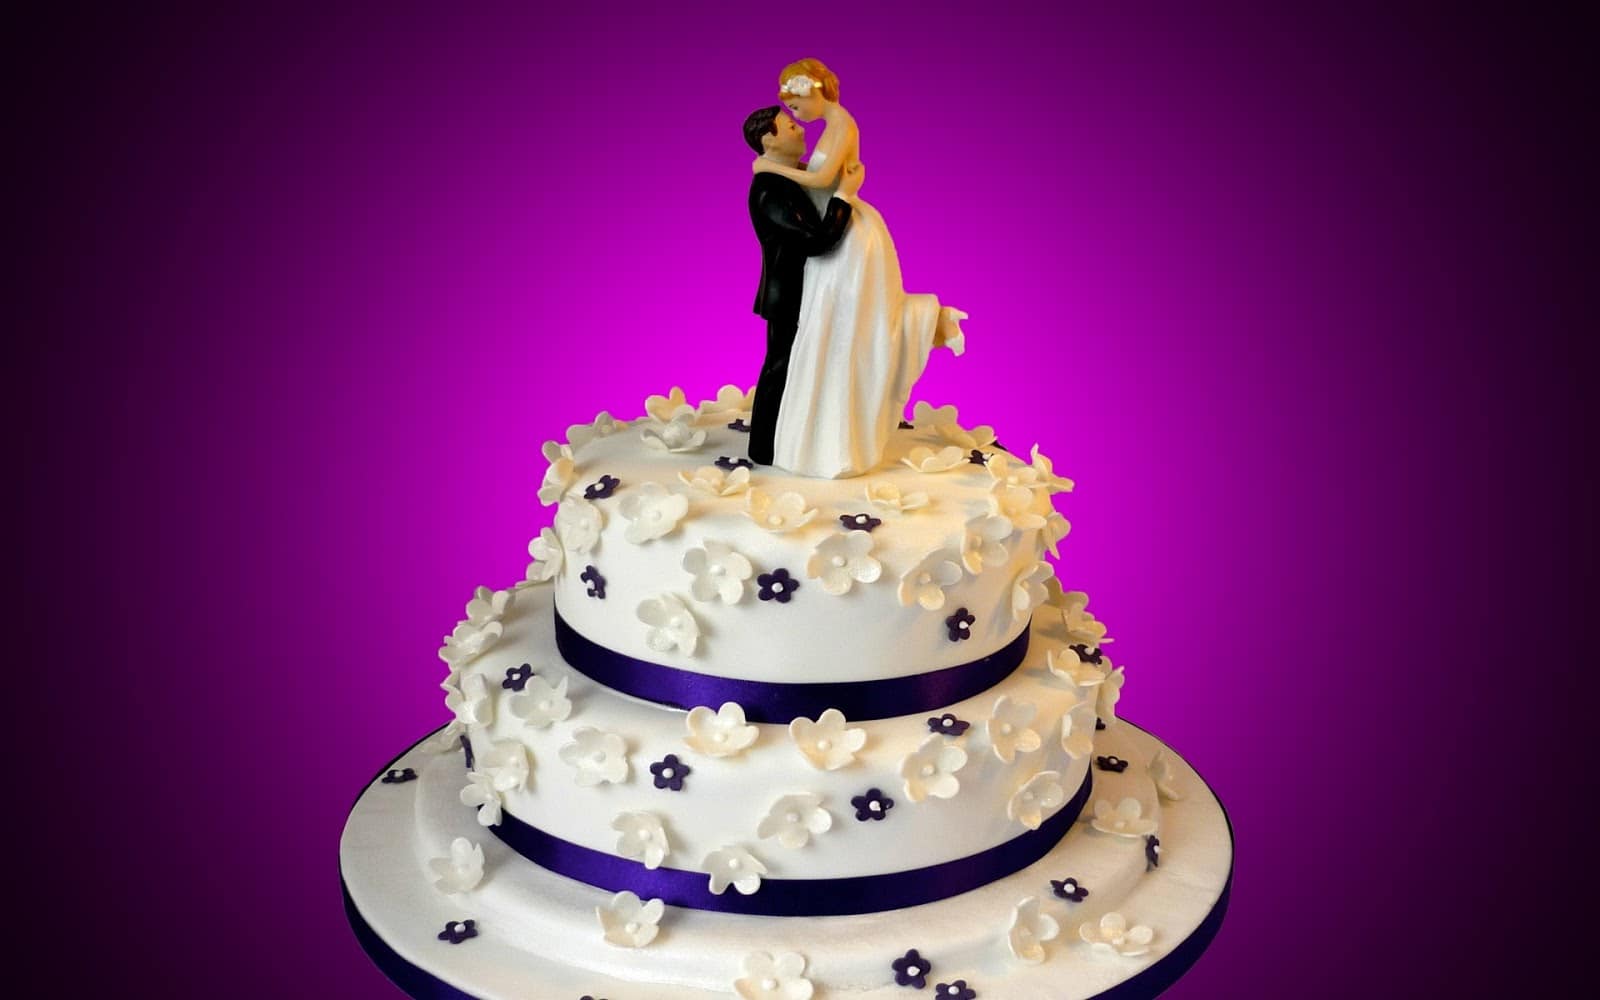 Top Ten Cakes Perfect for a Memorable Anniversary Celebration